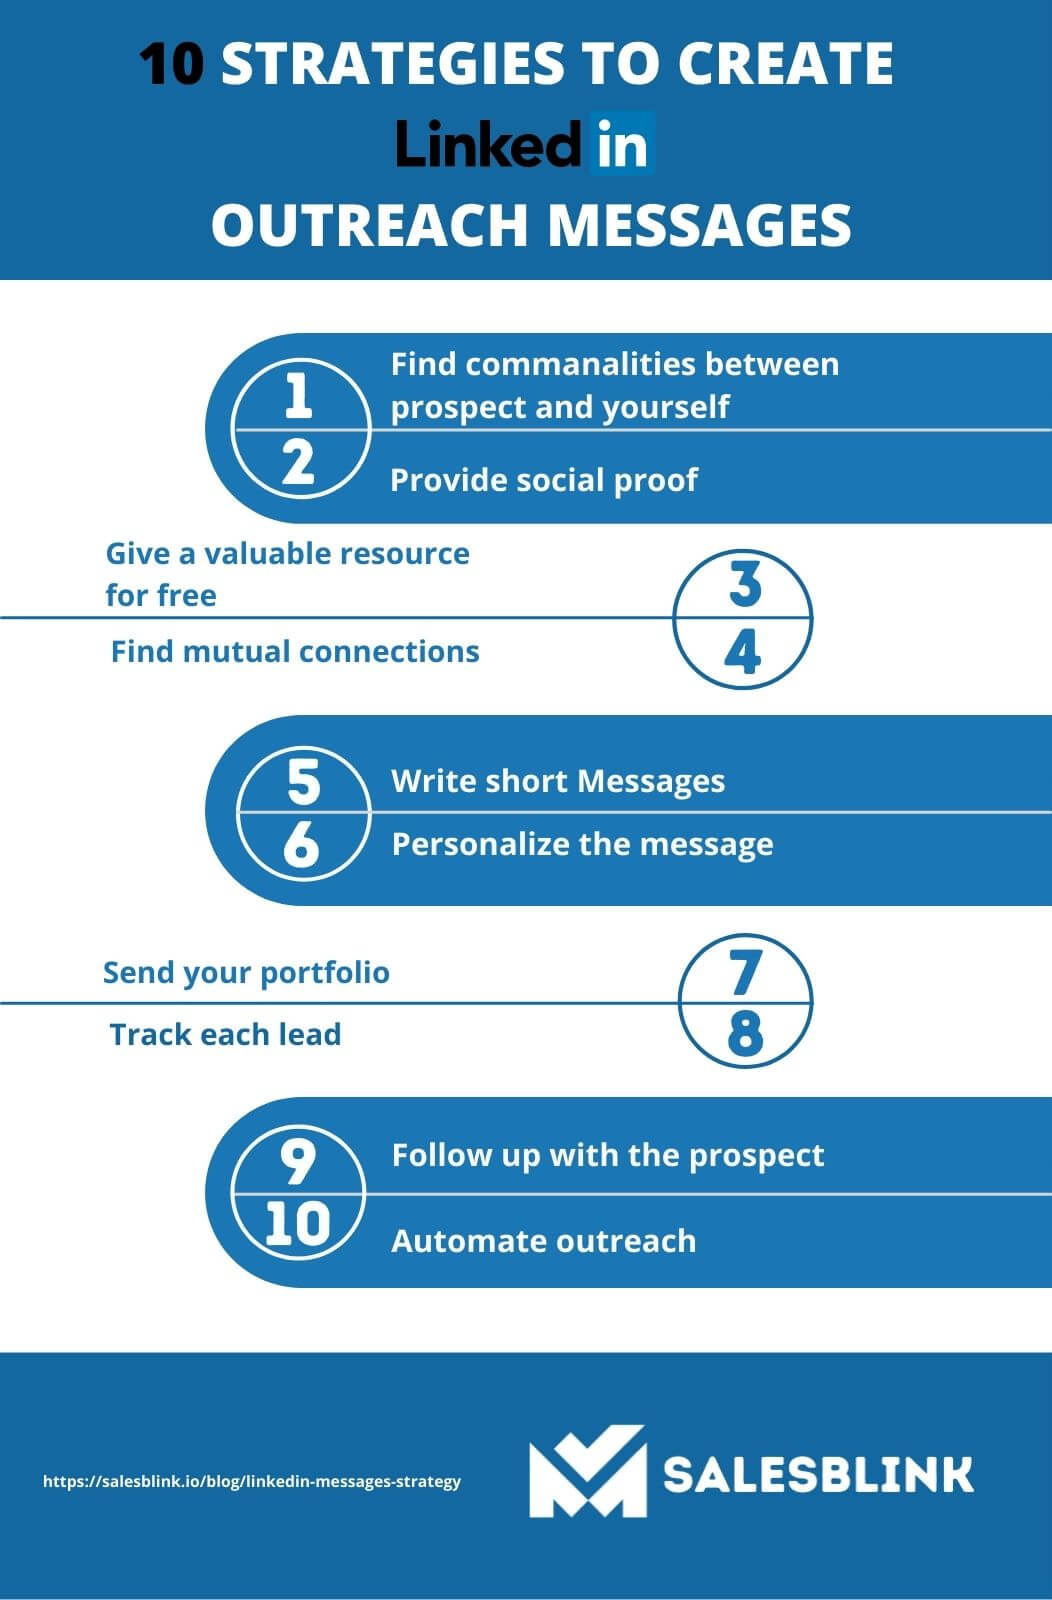 10 Best Linkedin Outreach Messages Strategy